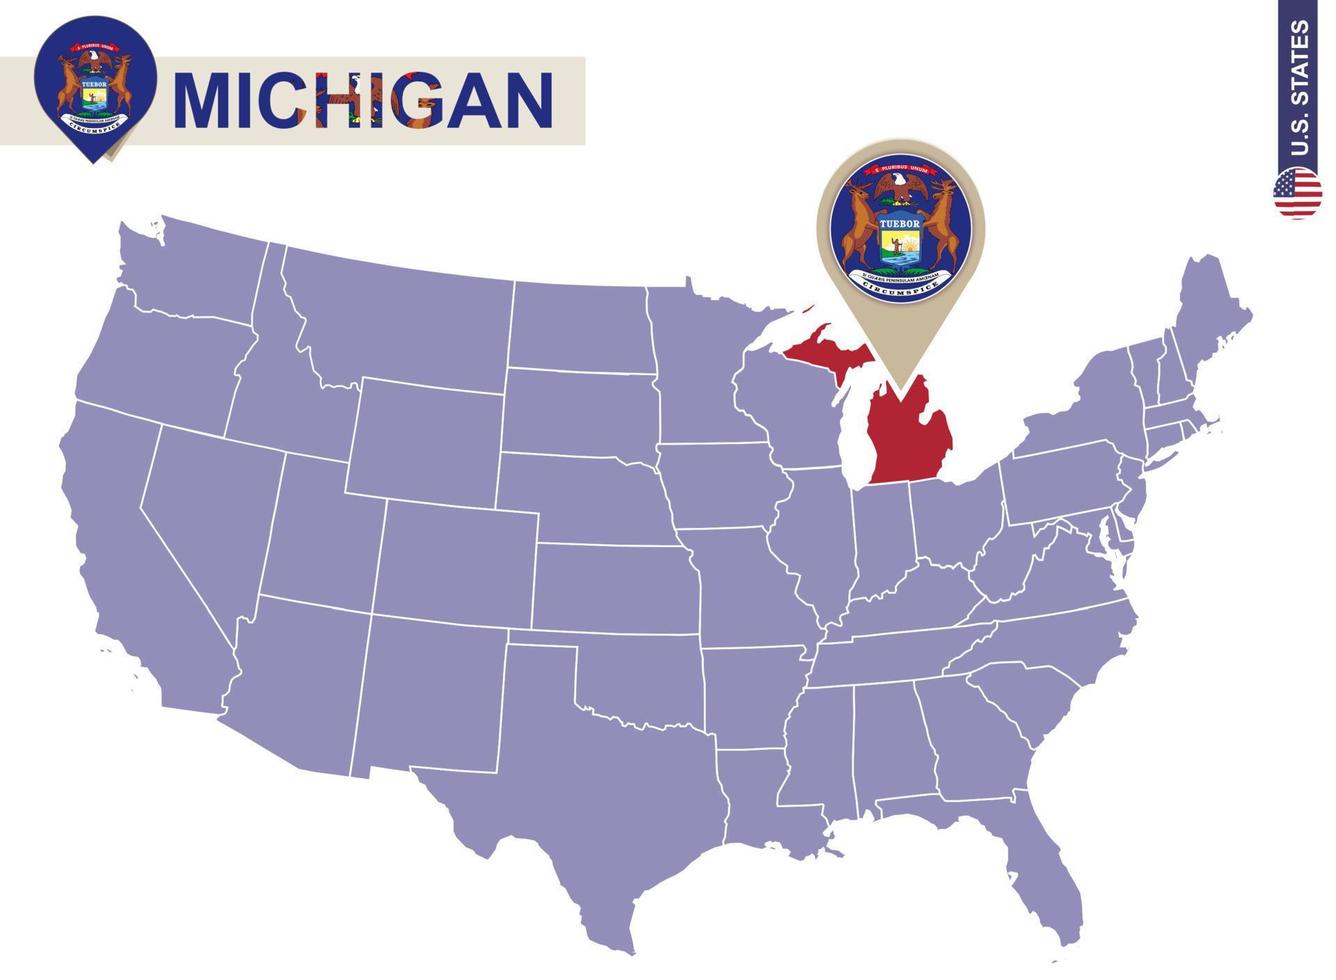 Michigan State on USA Map. Michigan flag and map. vector